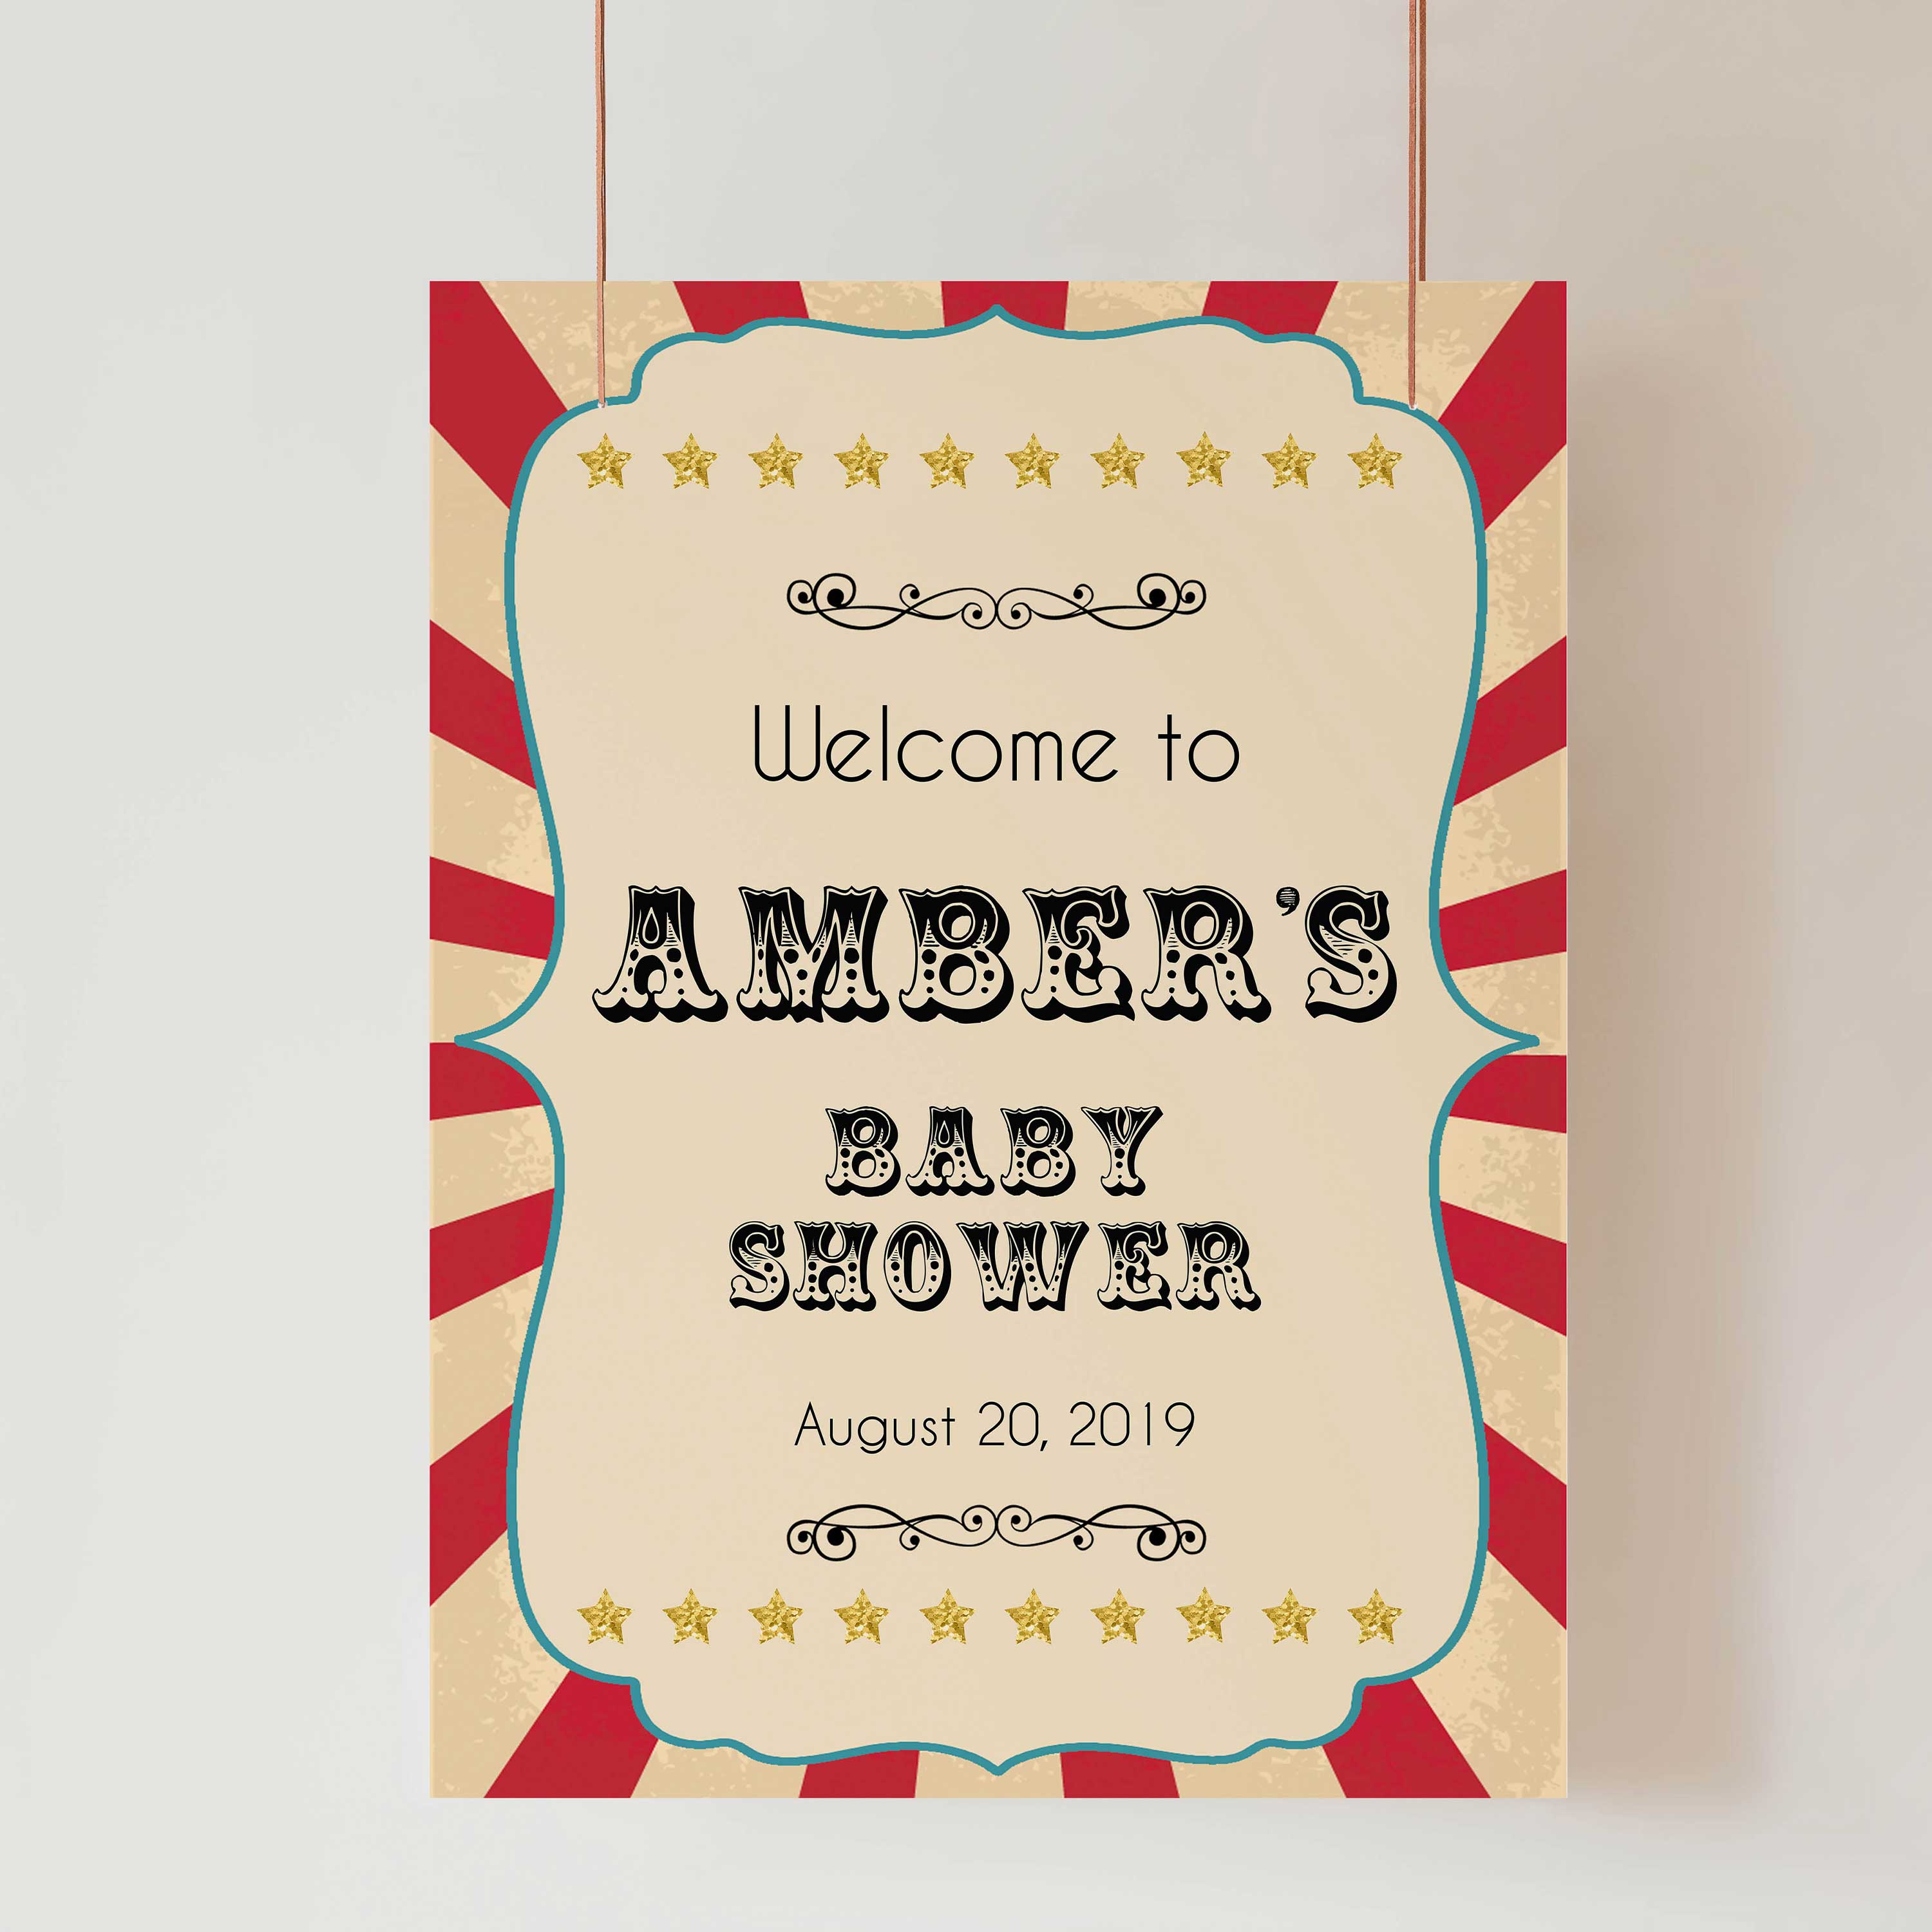 baby shower welcome sign, circus baby shower signs, printable baby shower signs, carnival baby shower signs